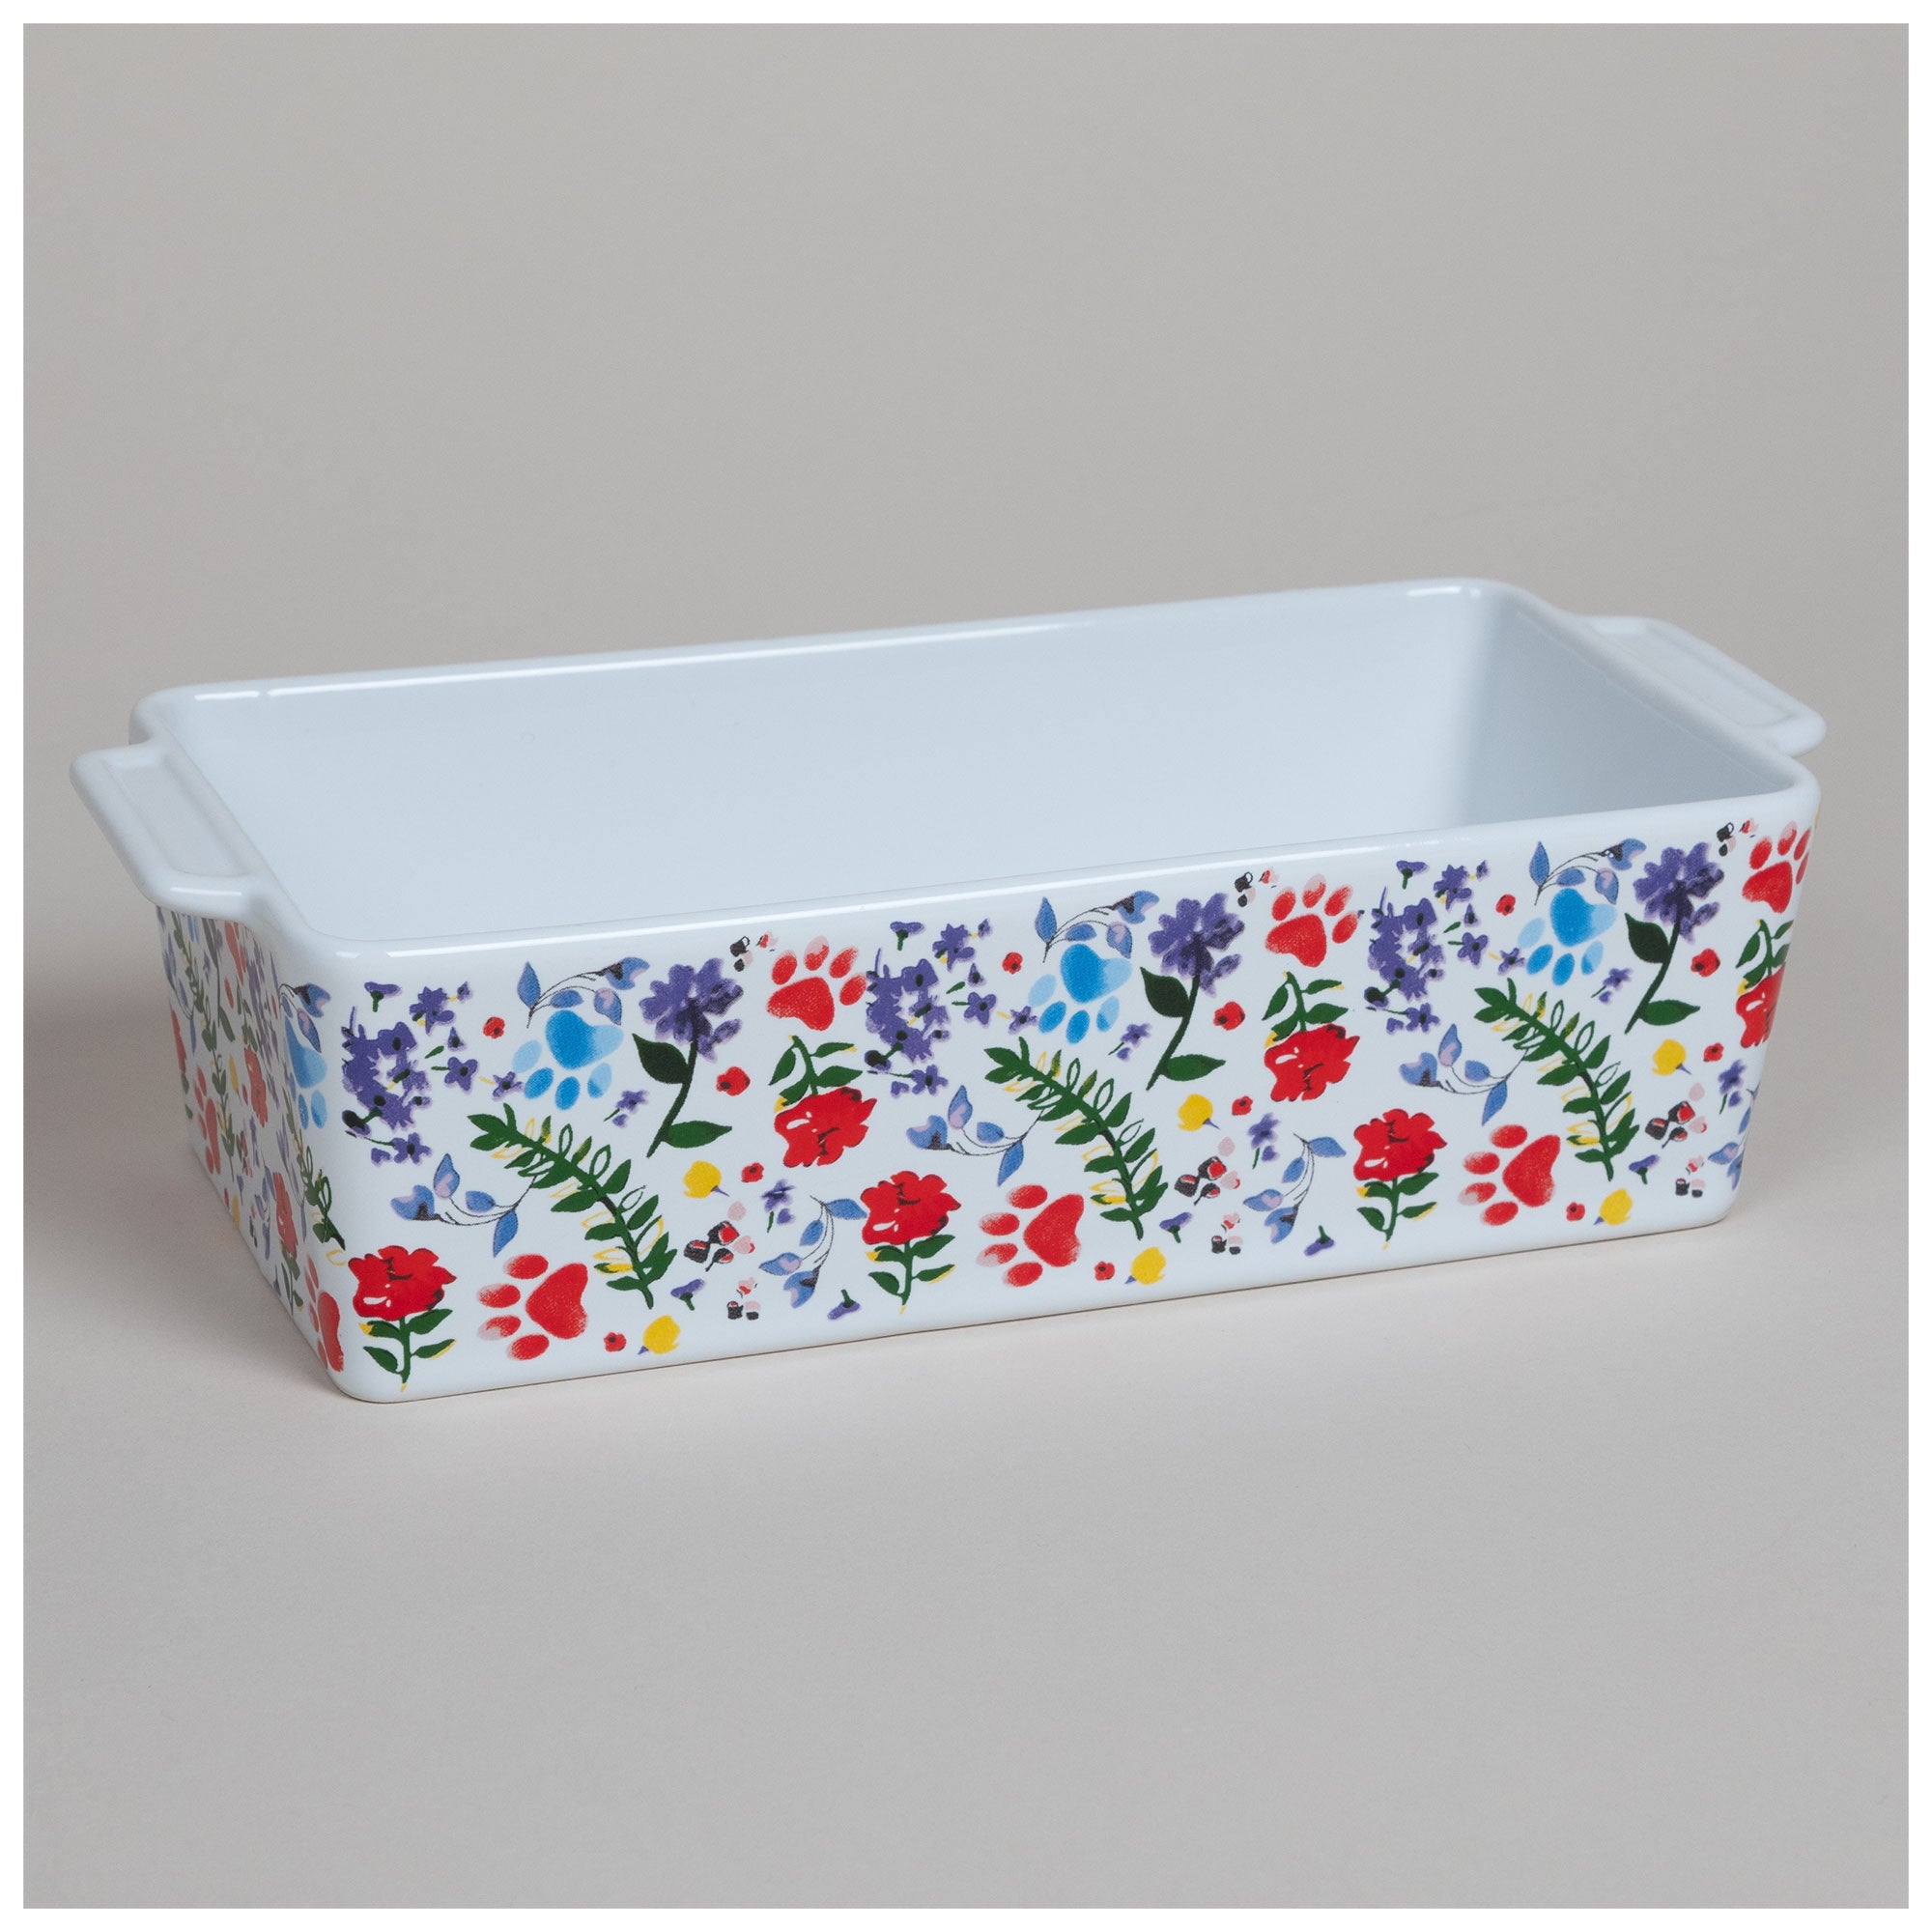 Made With Love Paw Print Ceramic Loaf Pan - Flower Garden Paws